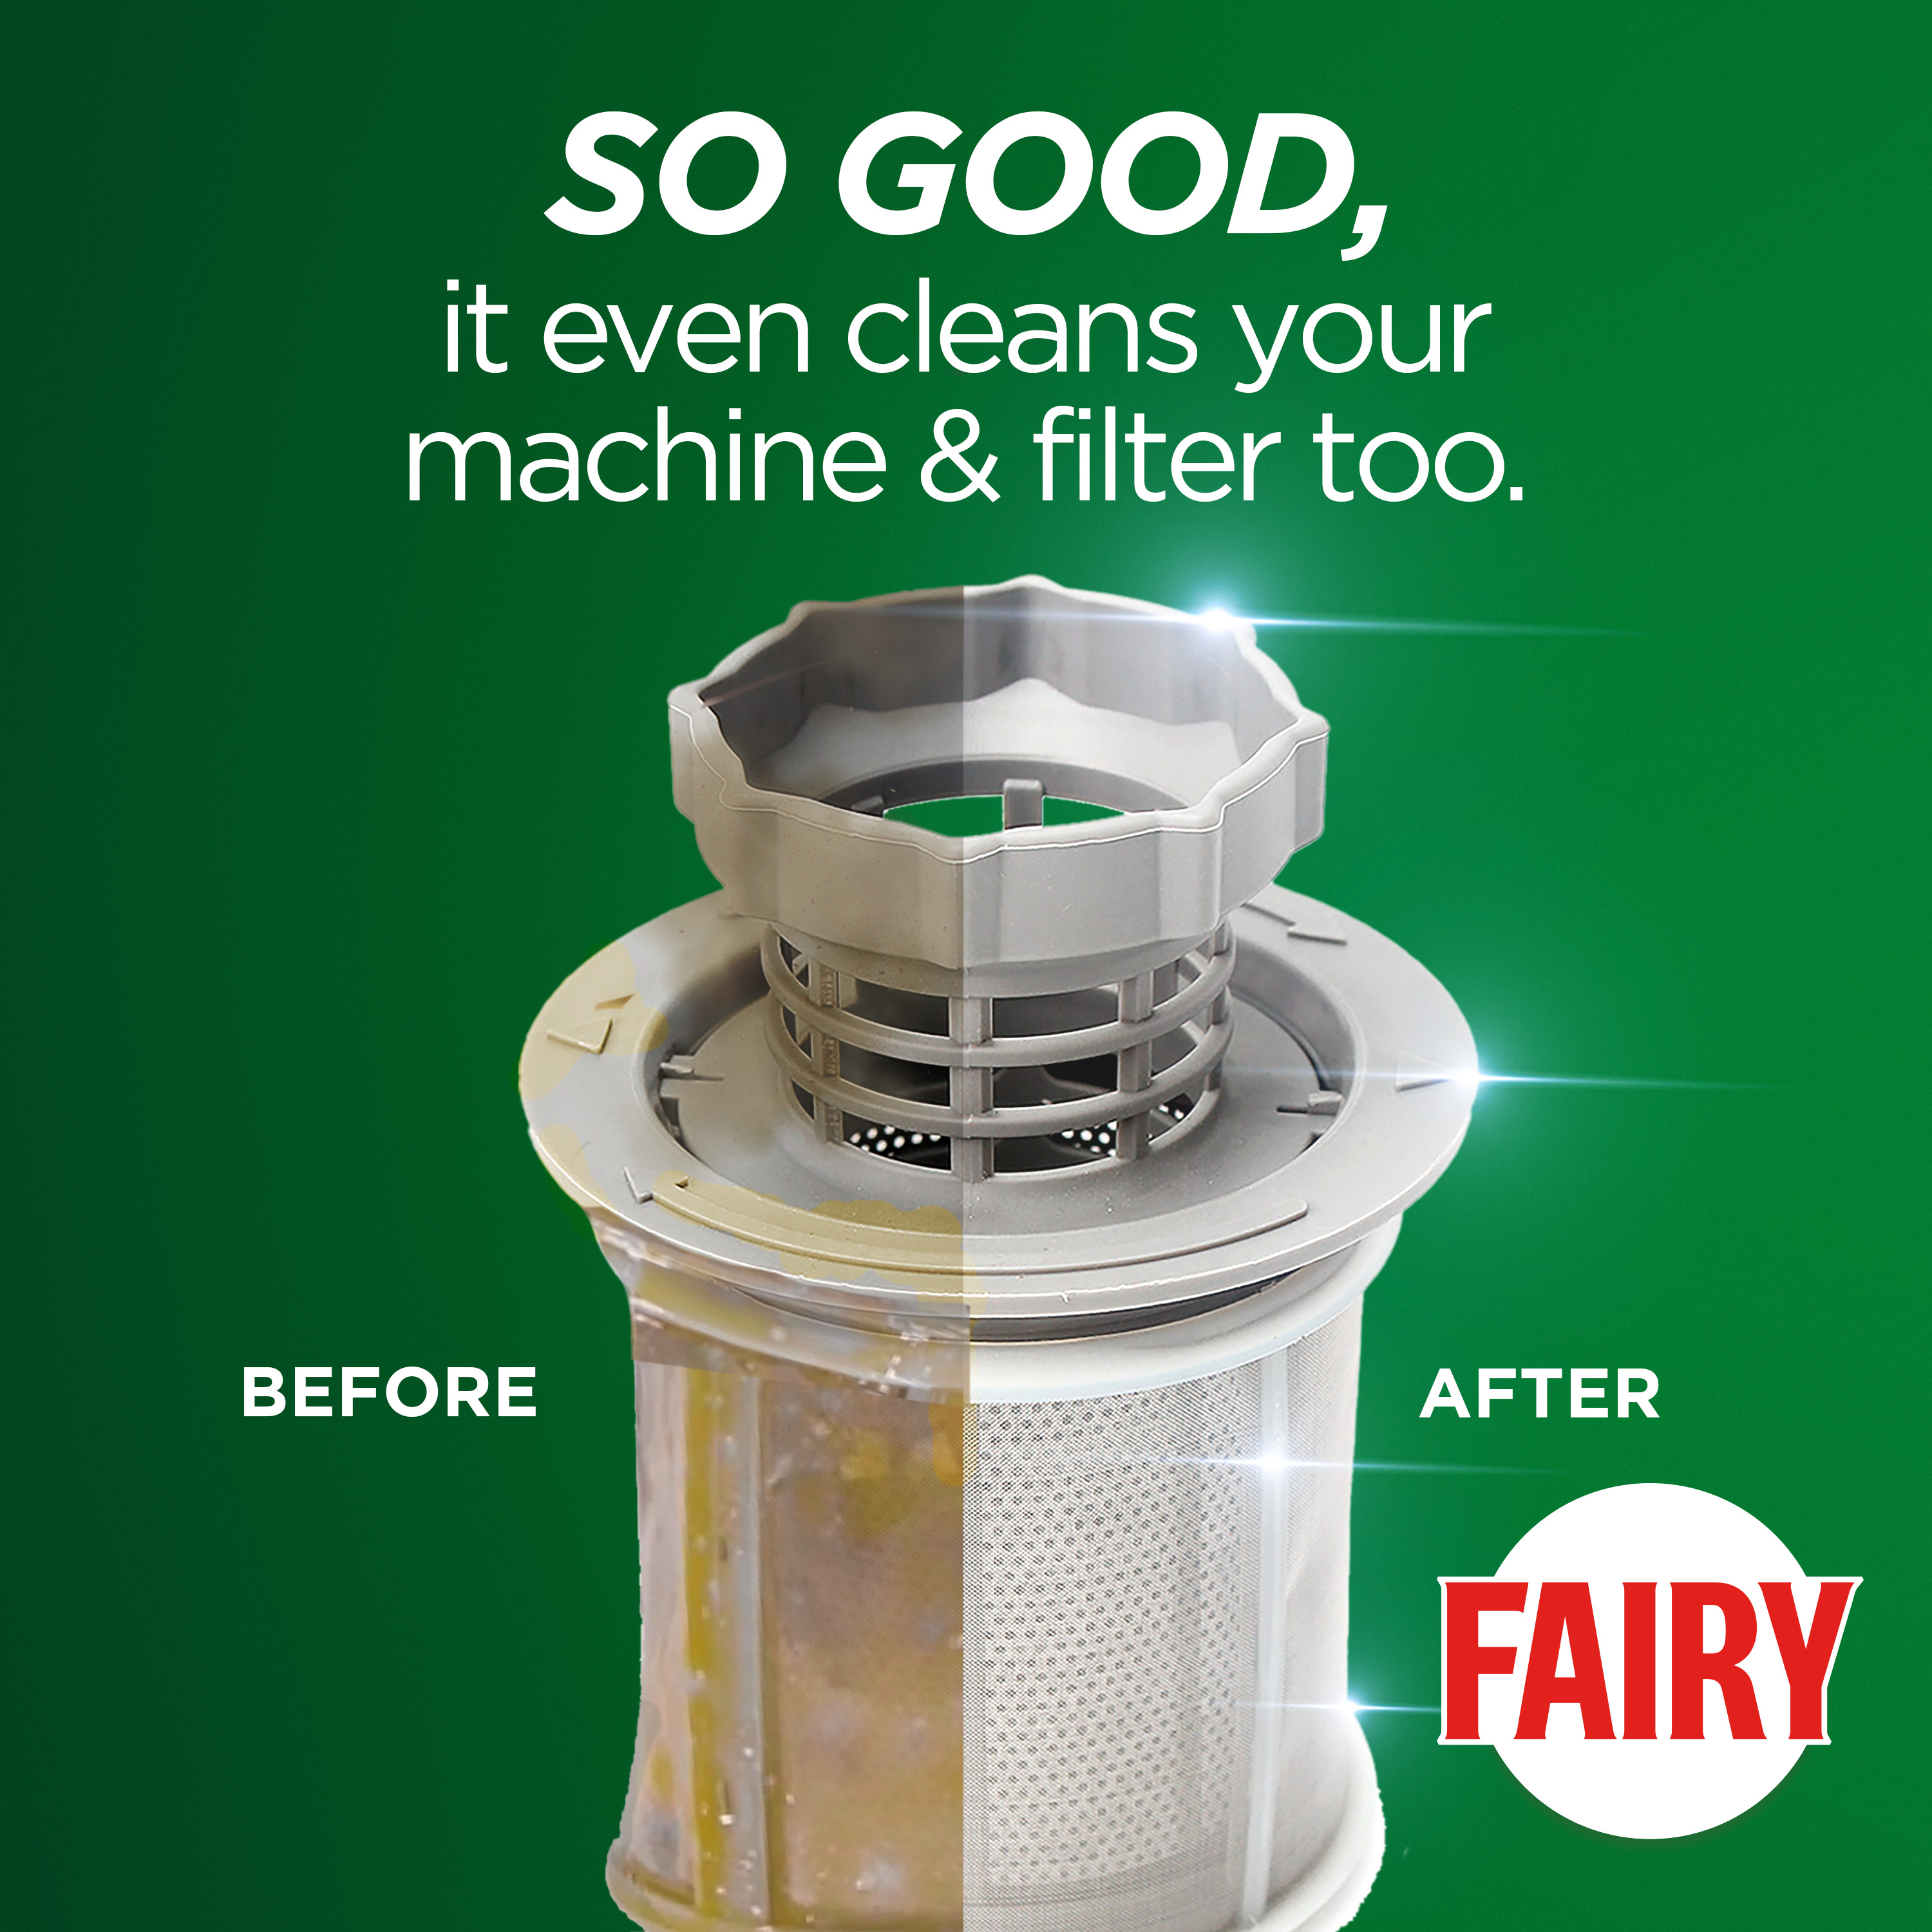 Fairy Platinum Plus Dishwasher Tablet's product packaging is made with recyclable terracycle & the plant operates with 100% renewable energy